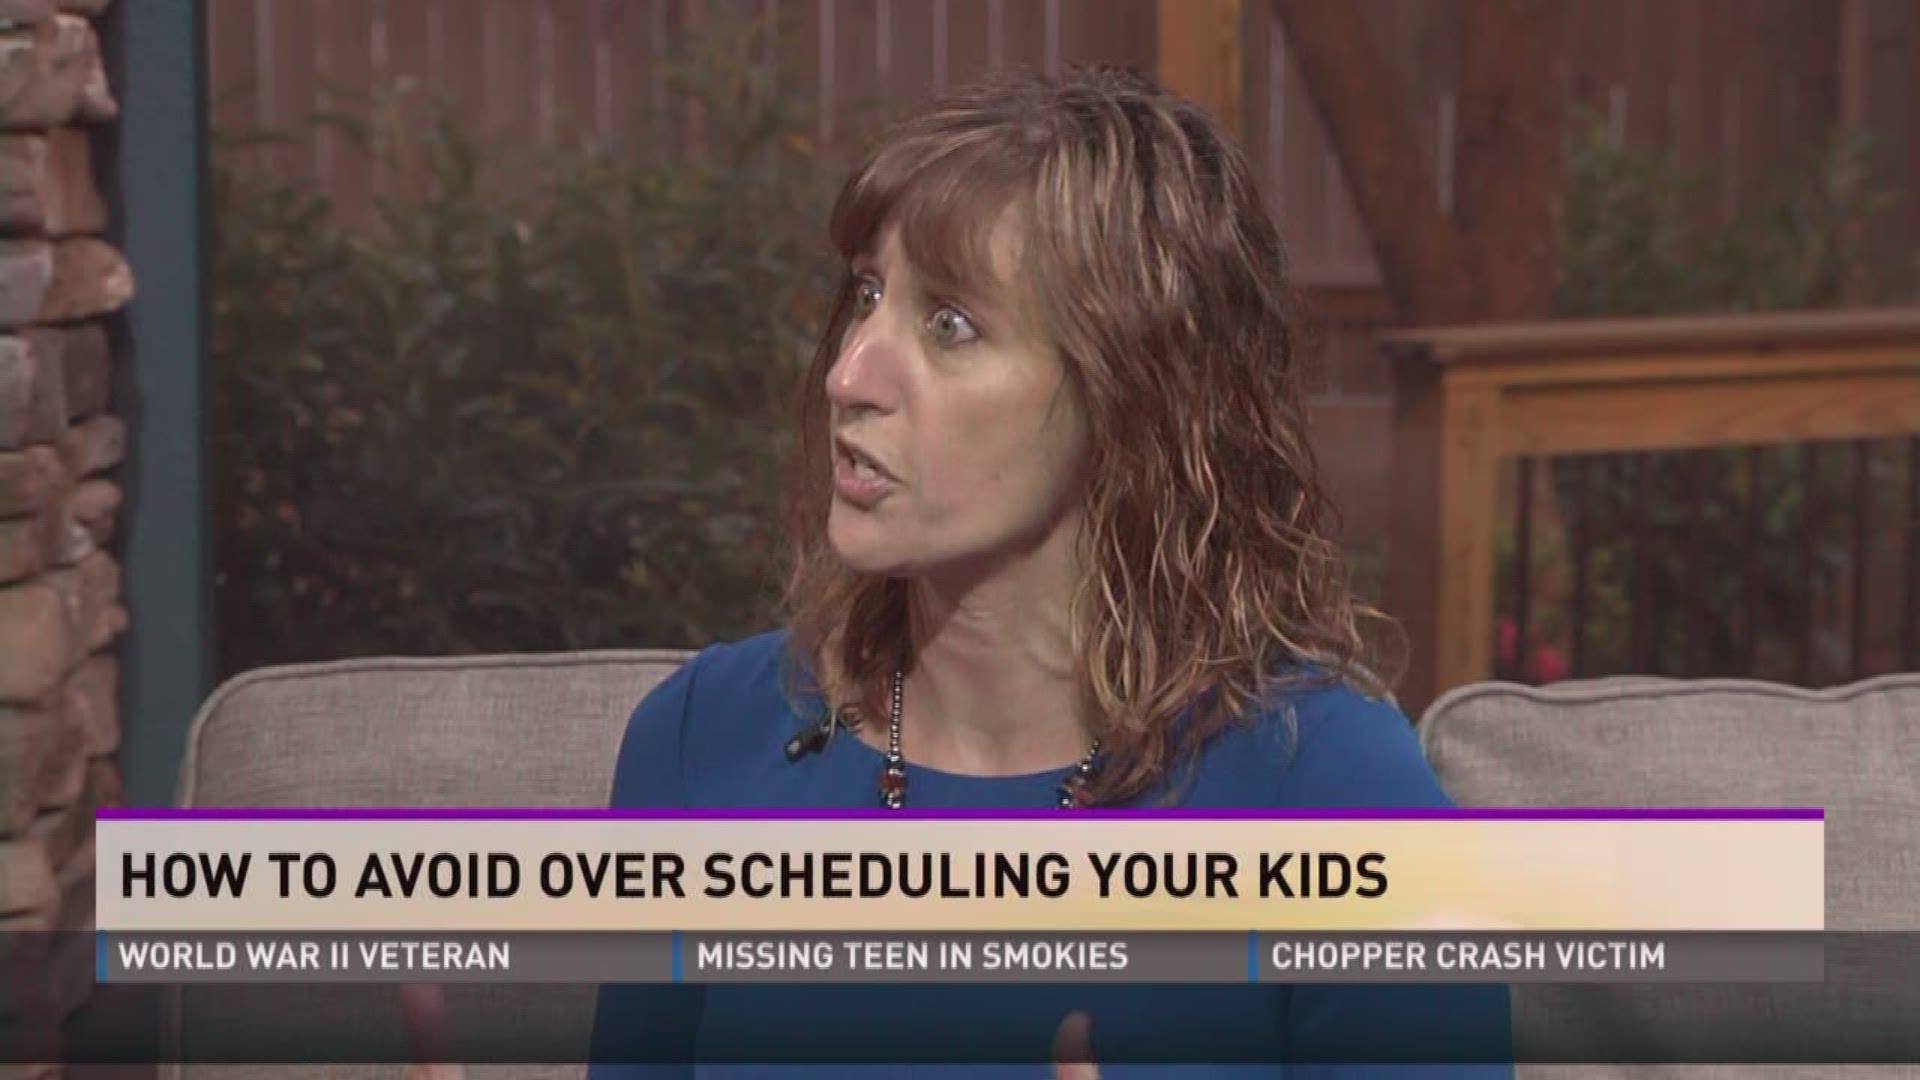 How to Avoid Over Scheduling Your Kids